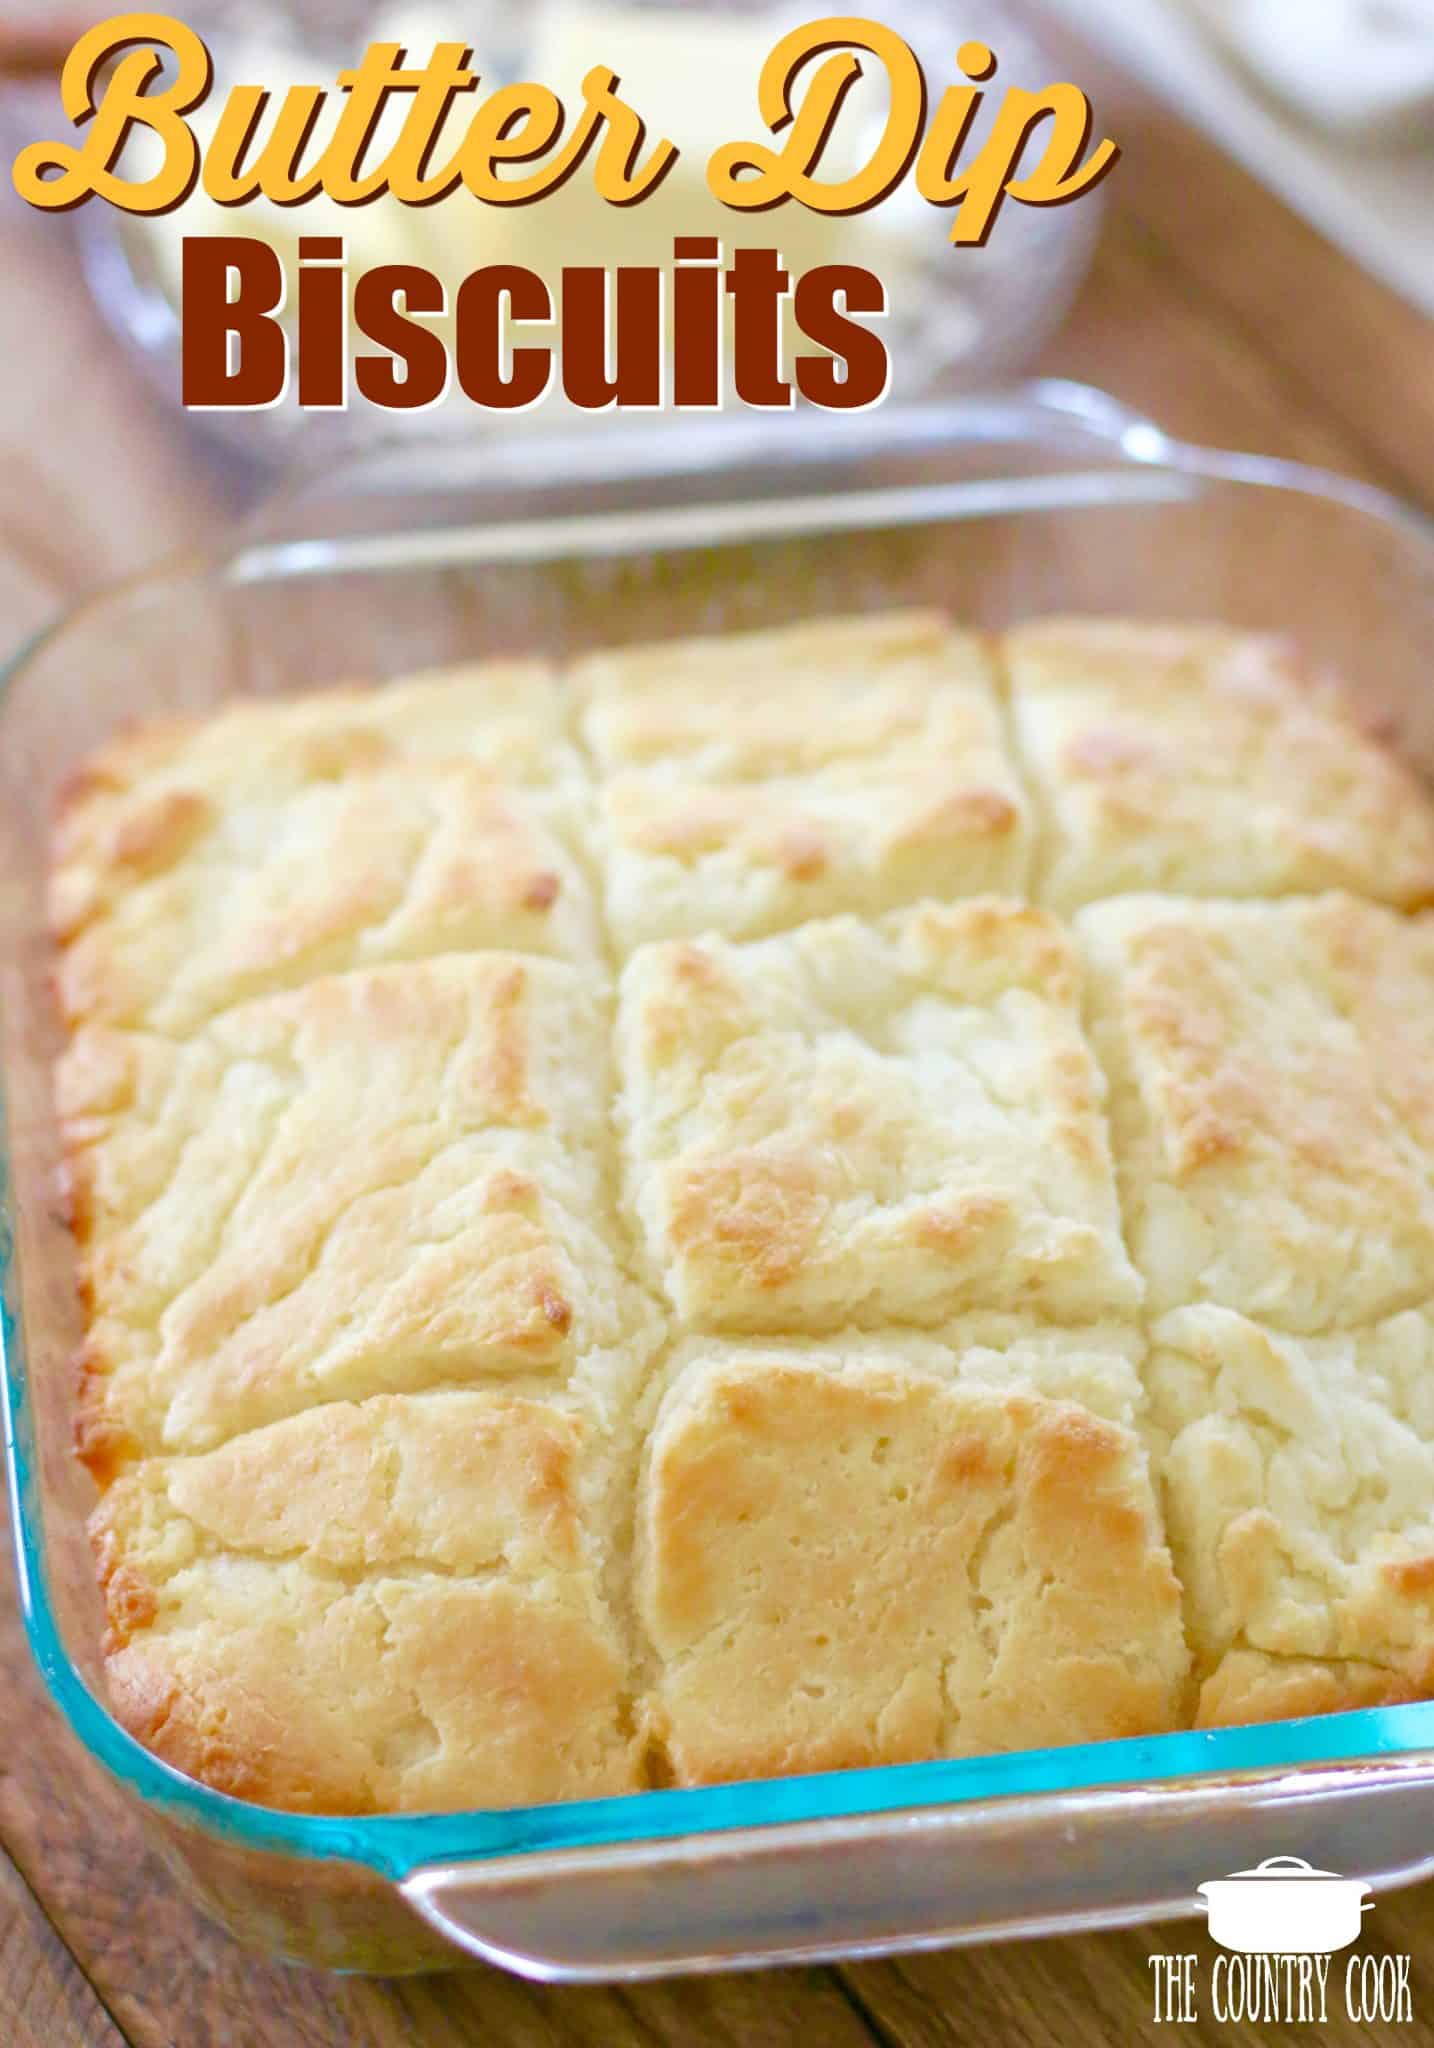 Butter Dip Buttermilk Biscuits recipe from The Country Cook. Biscuits shown fully baked in a square glass baking pan/